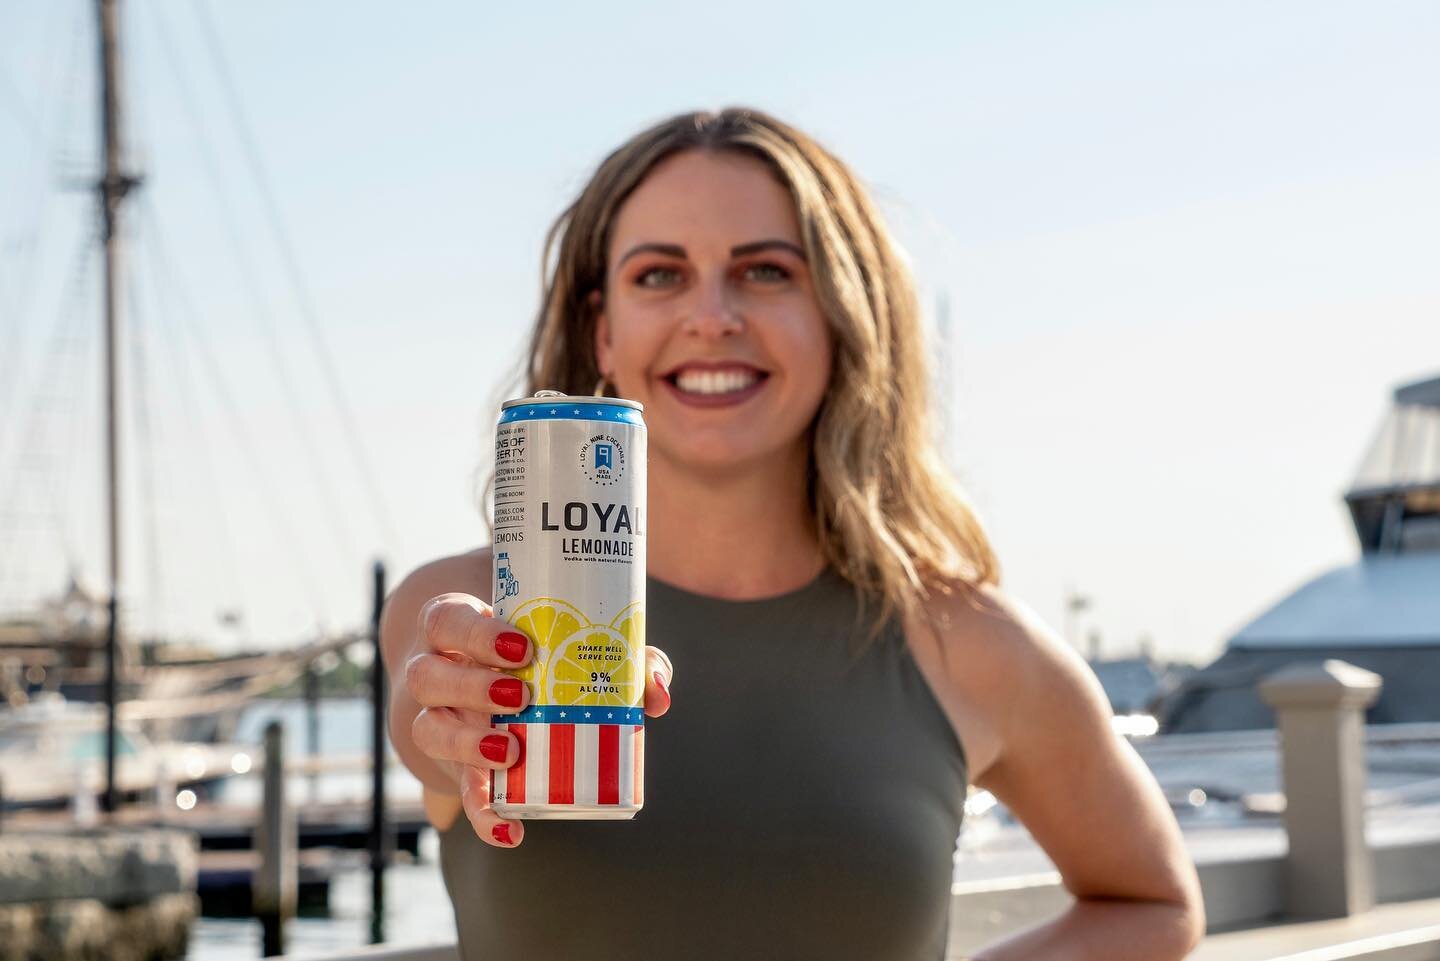 STAY L O Y A L 🍋📸

We had the opportunity to capture cinematic video content for a @loyal9cocktails event in beautiful Rhode Island! We&rsquo;re looking forward to sharing the videos we created for this super cool, local to New England brand! 

Bra